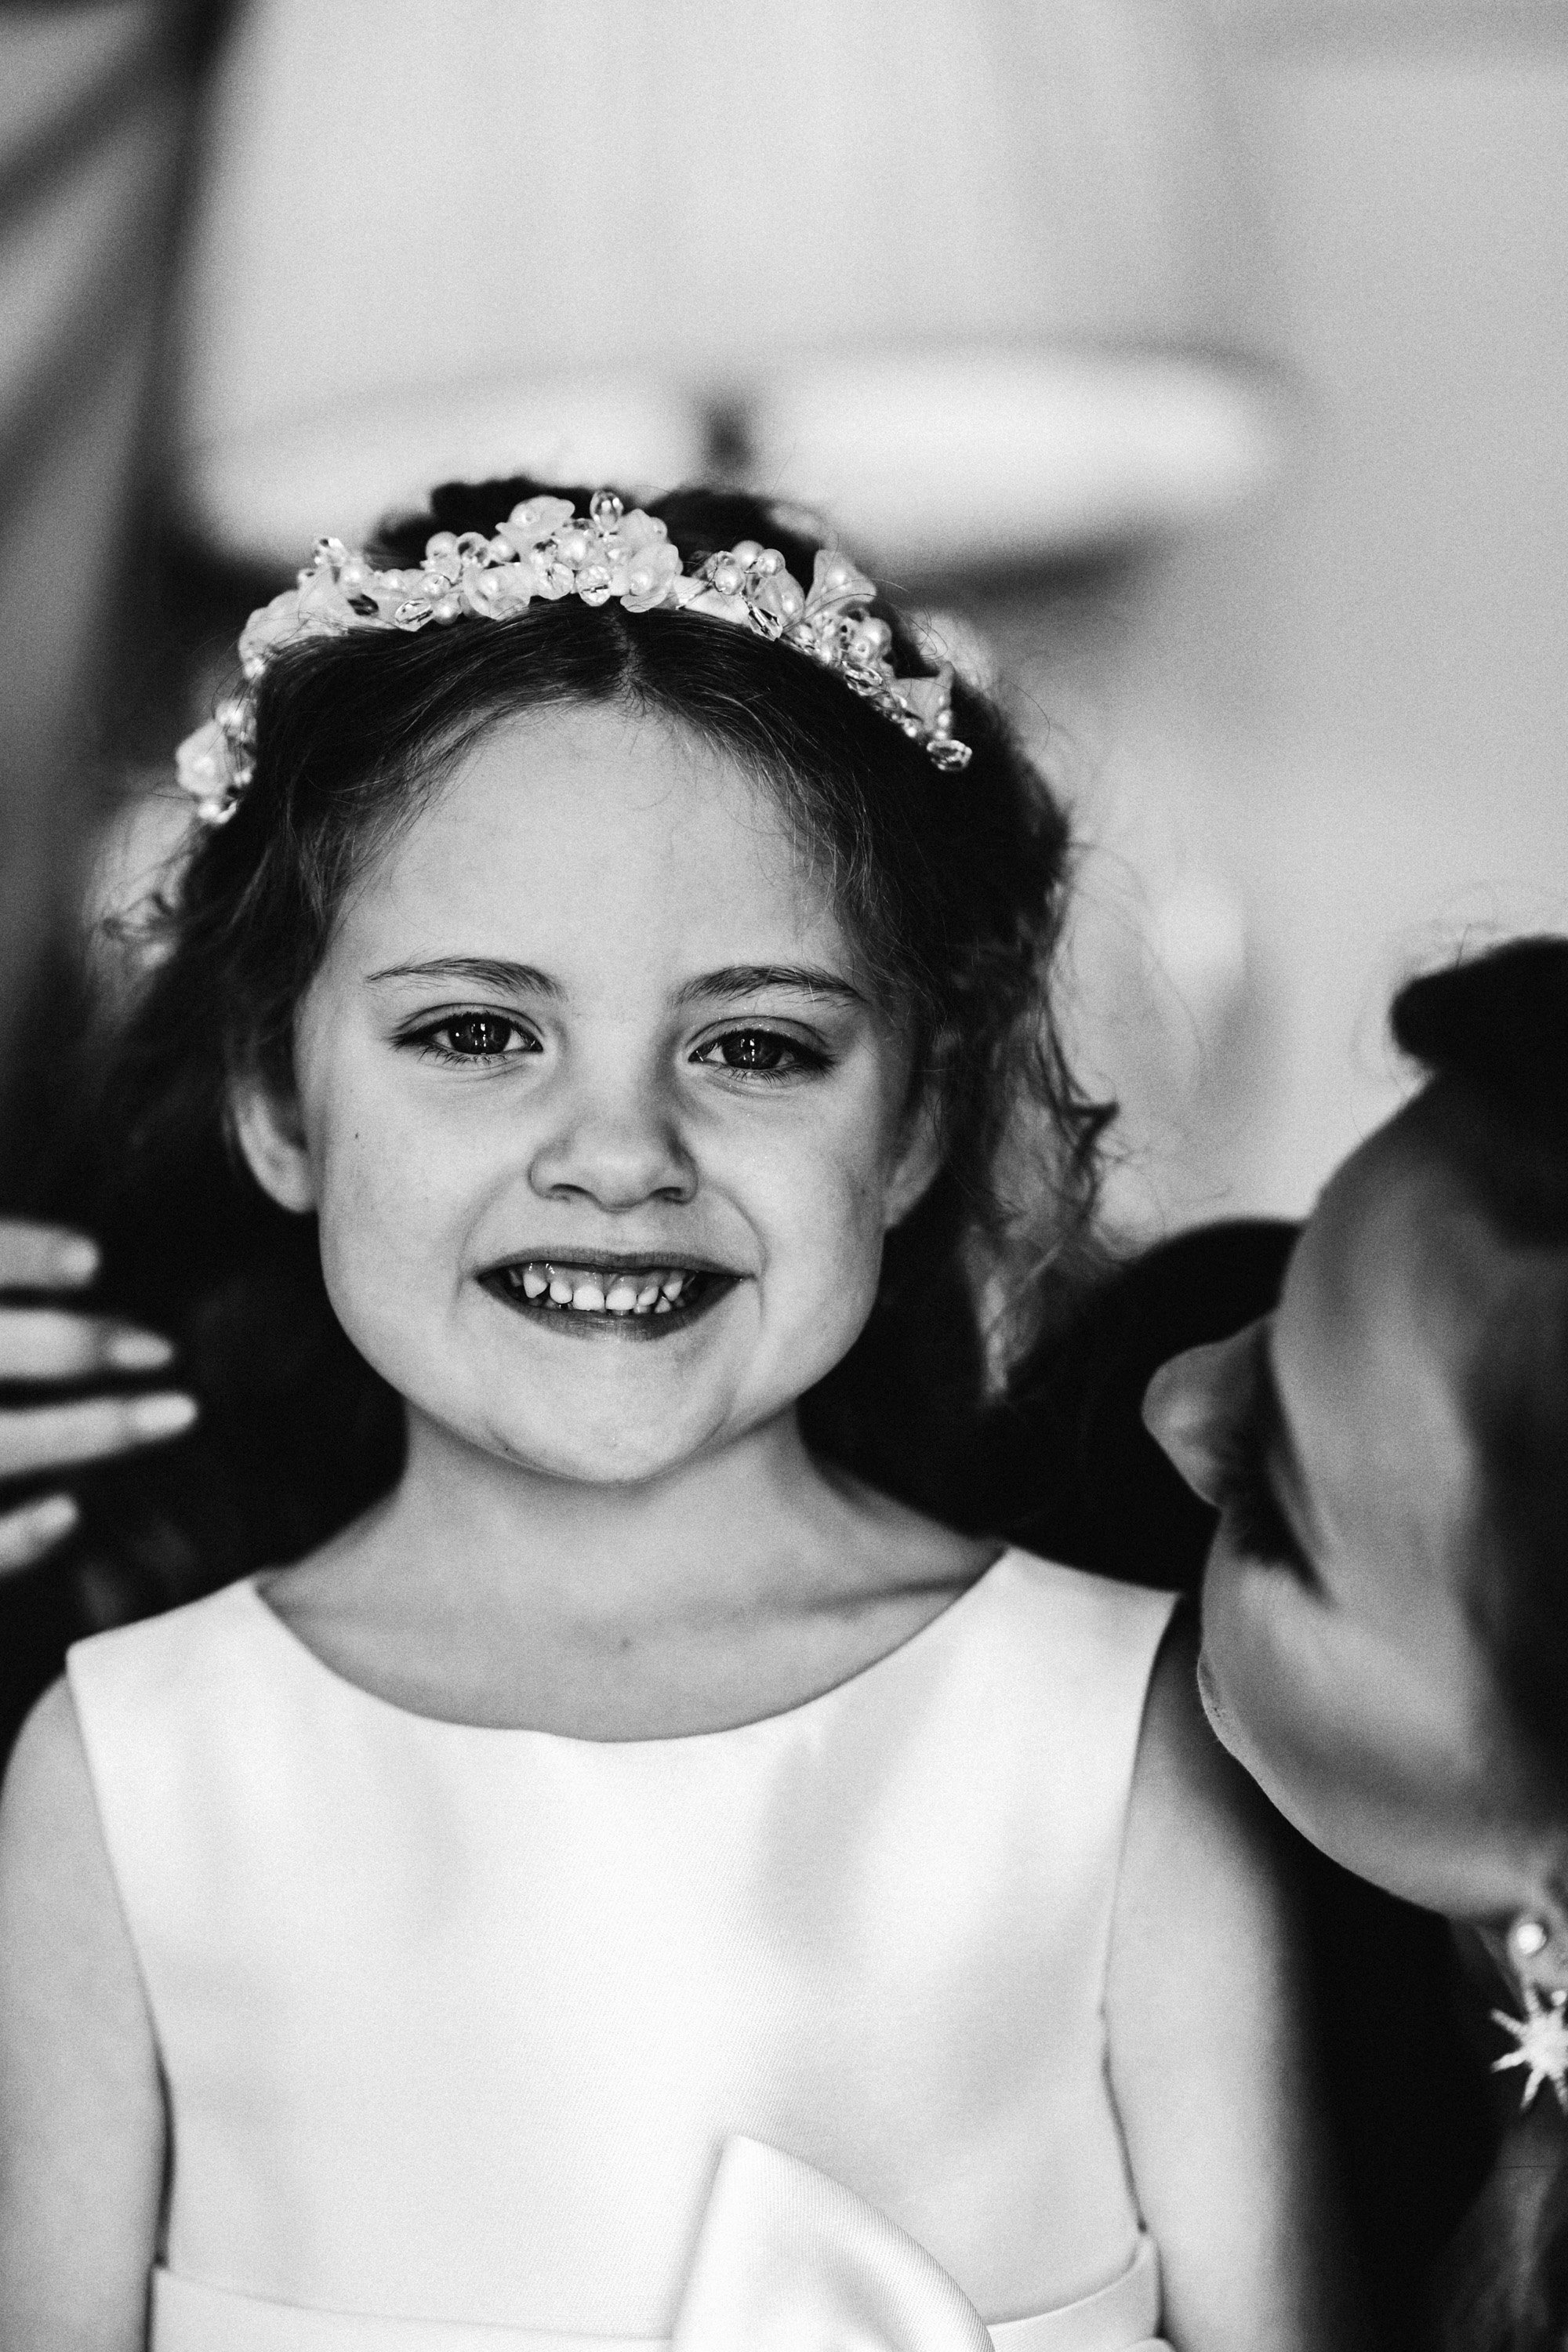 Brides daughter is flower girl with delicate tiara of pearls